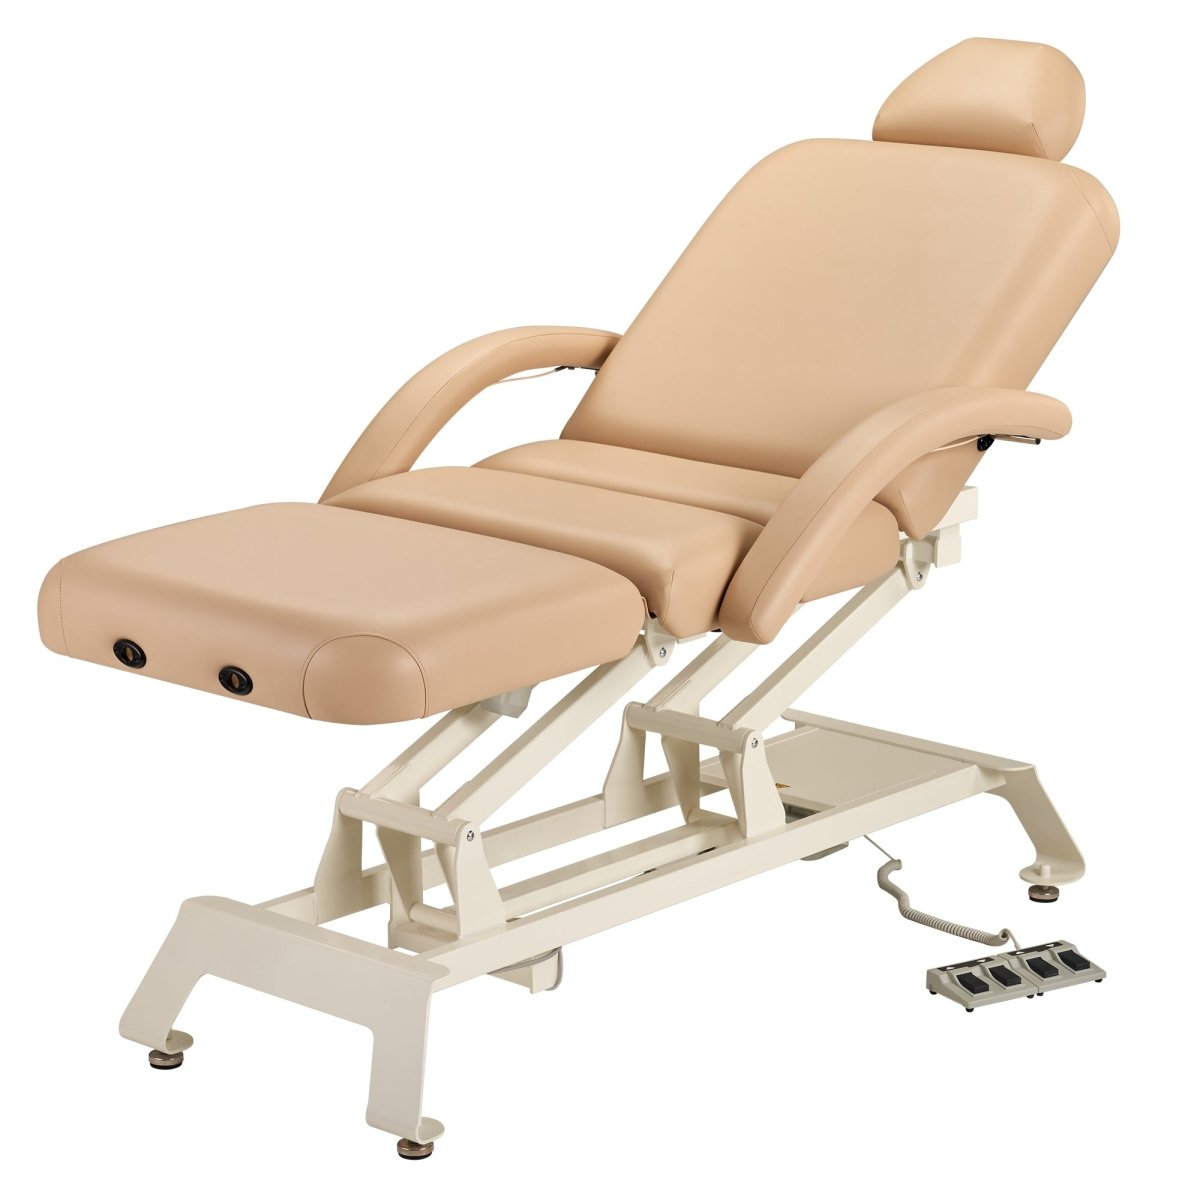 Pathway Deluxe Massage Table - Greenlife Treatment-Electric Massage Bed